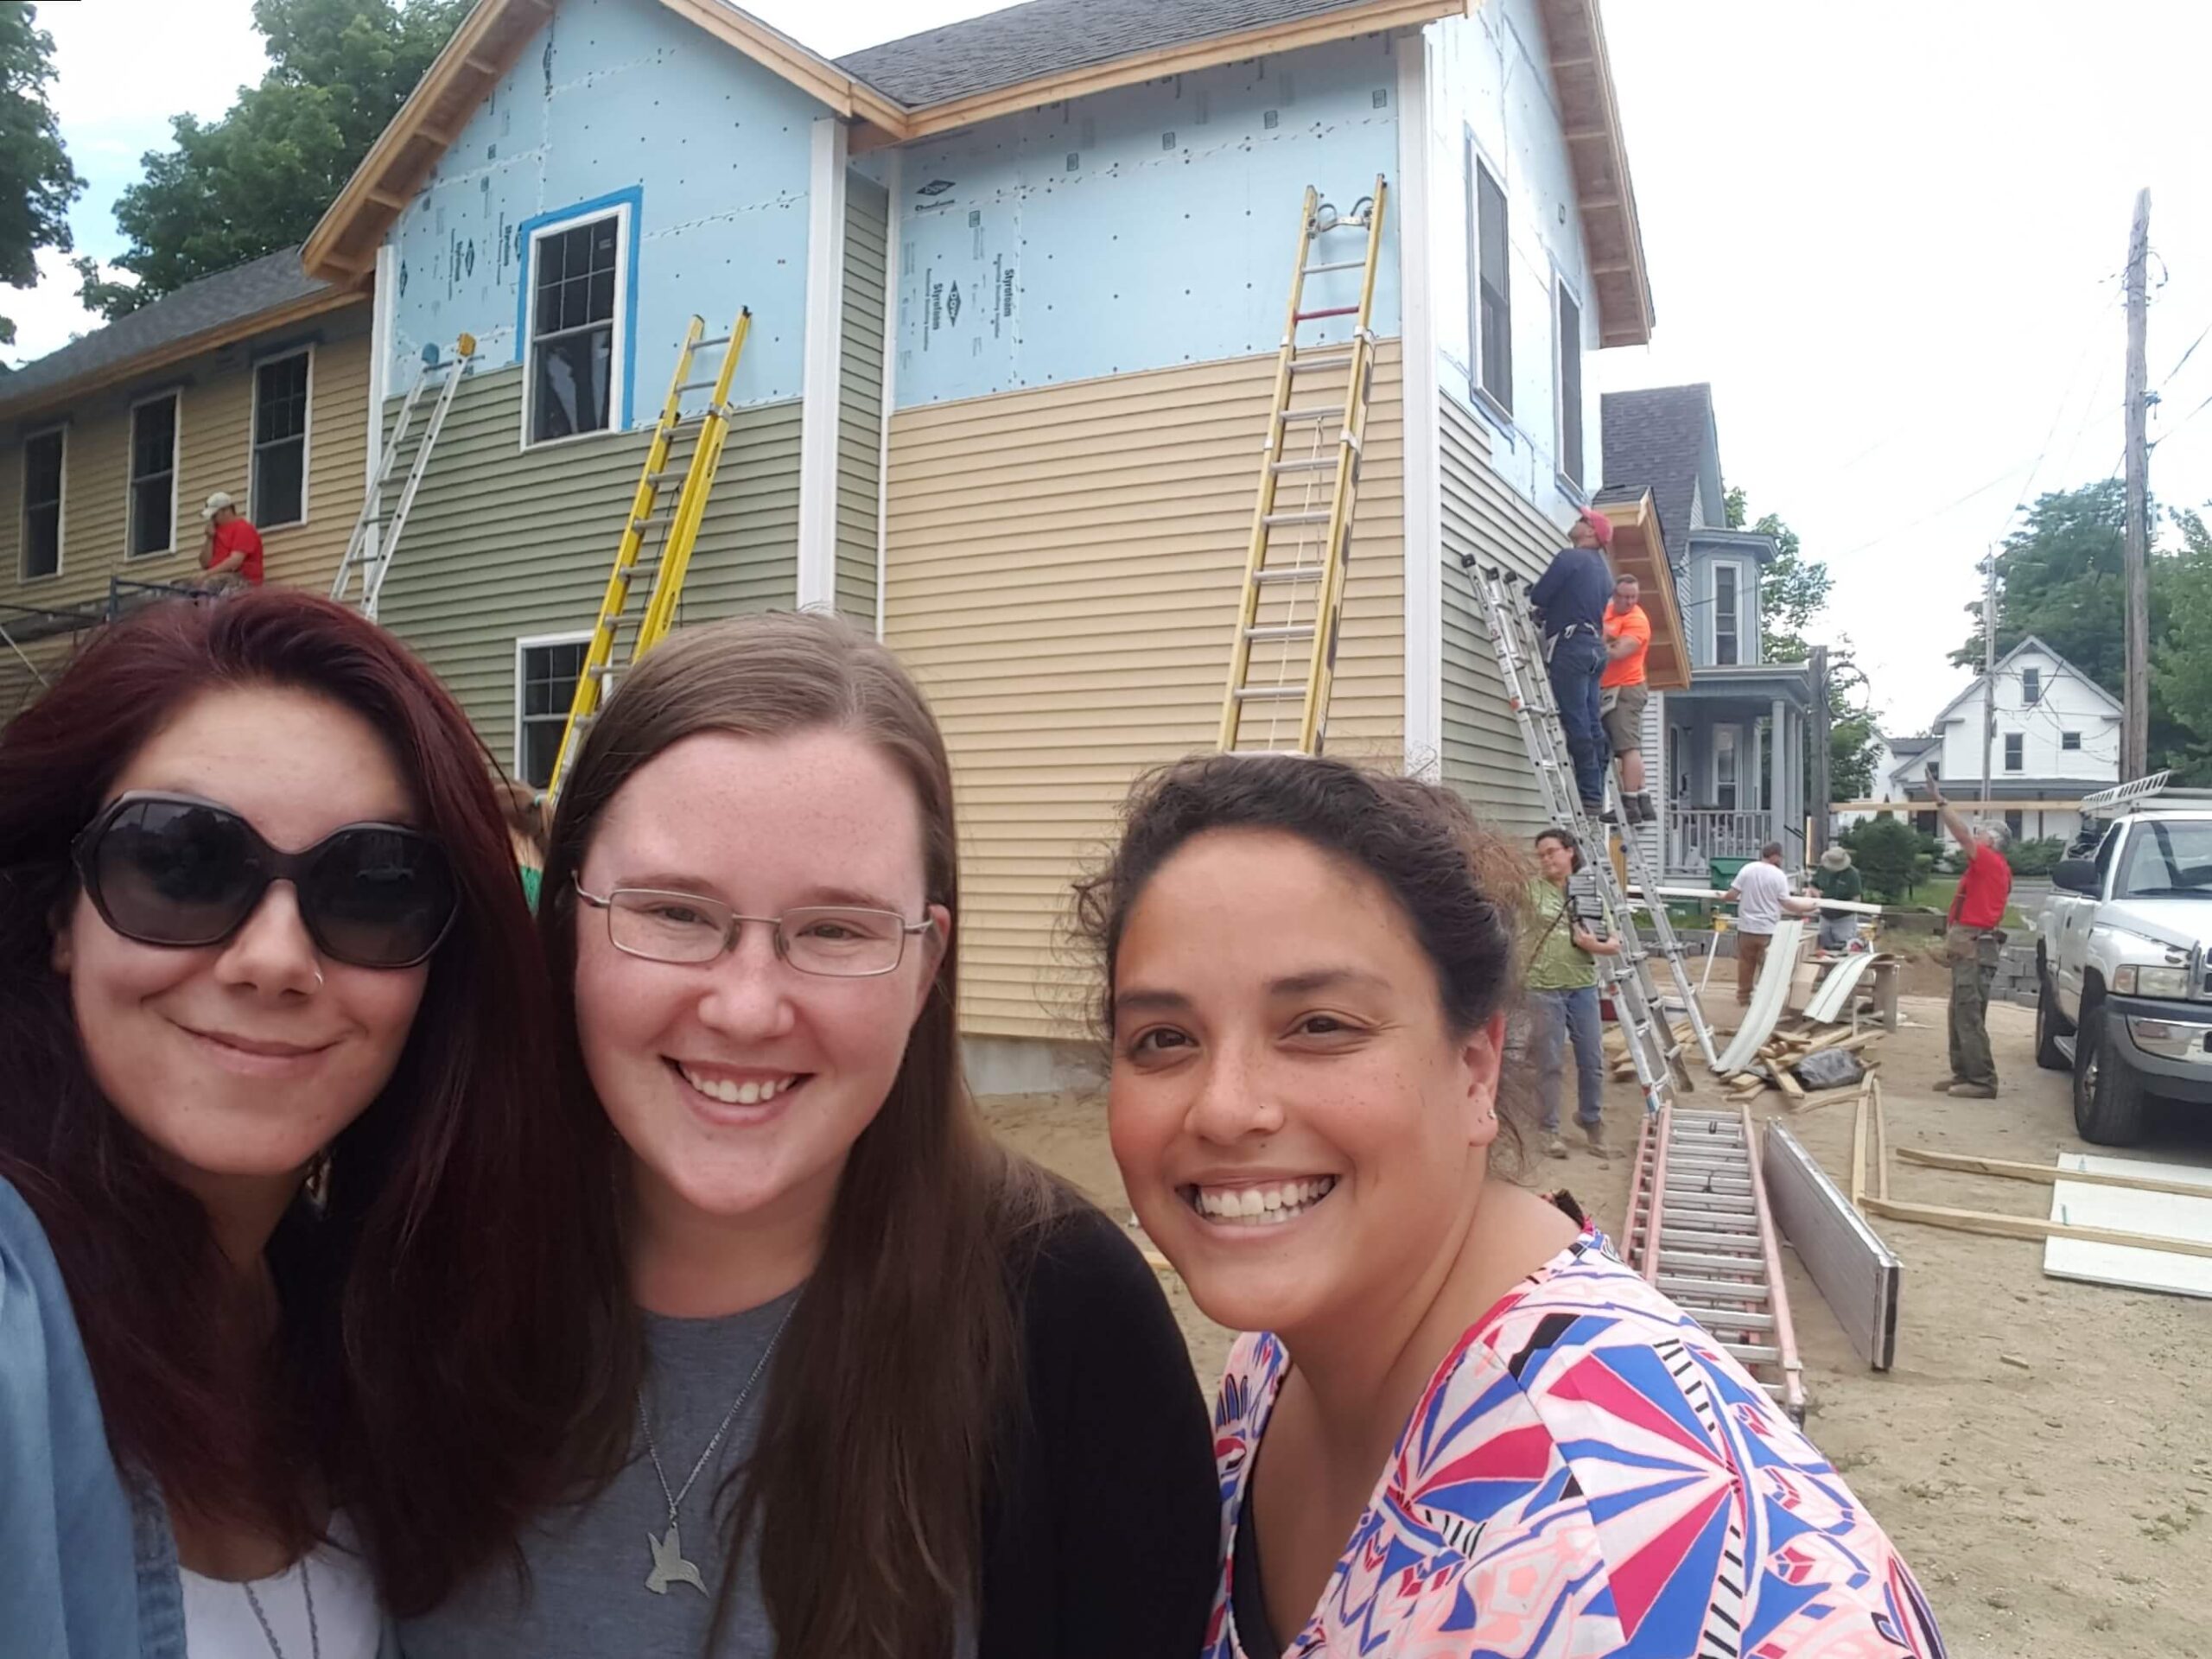 Three young women are gathered close together in front of a home under construction. They are looking into the camera and smiling.